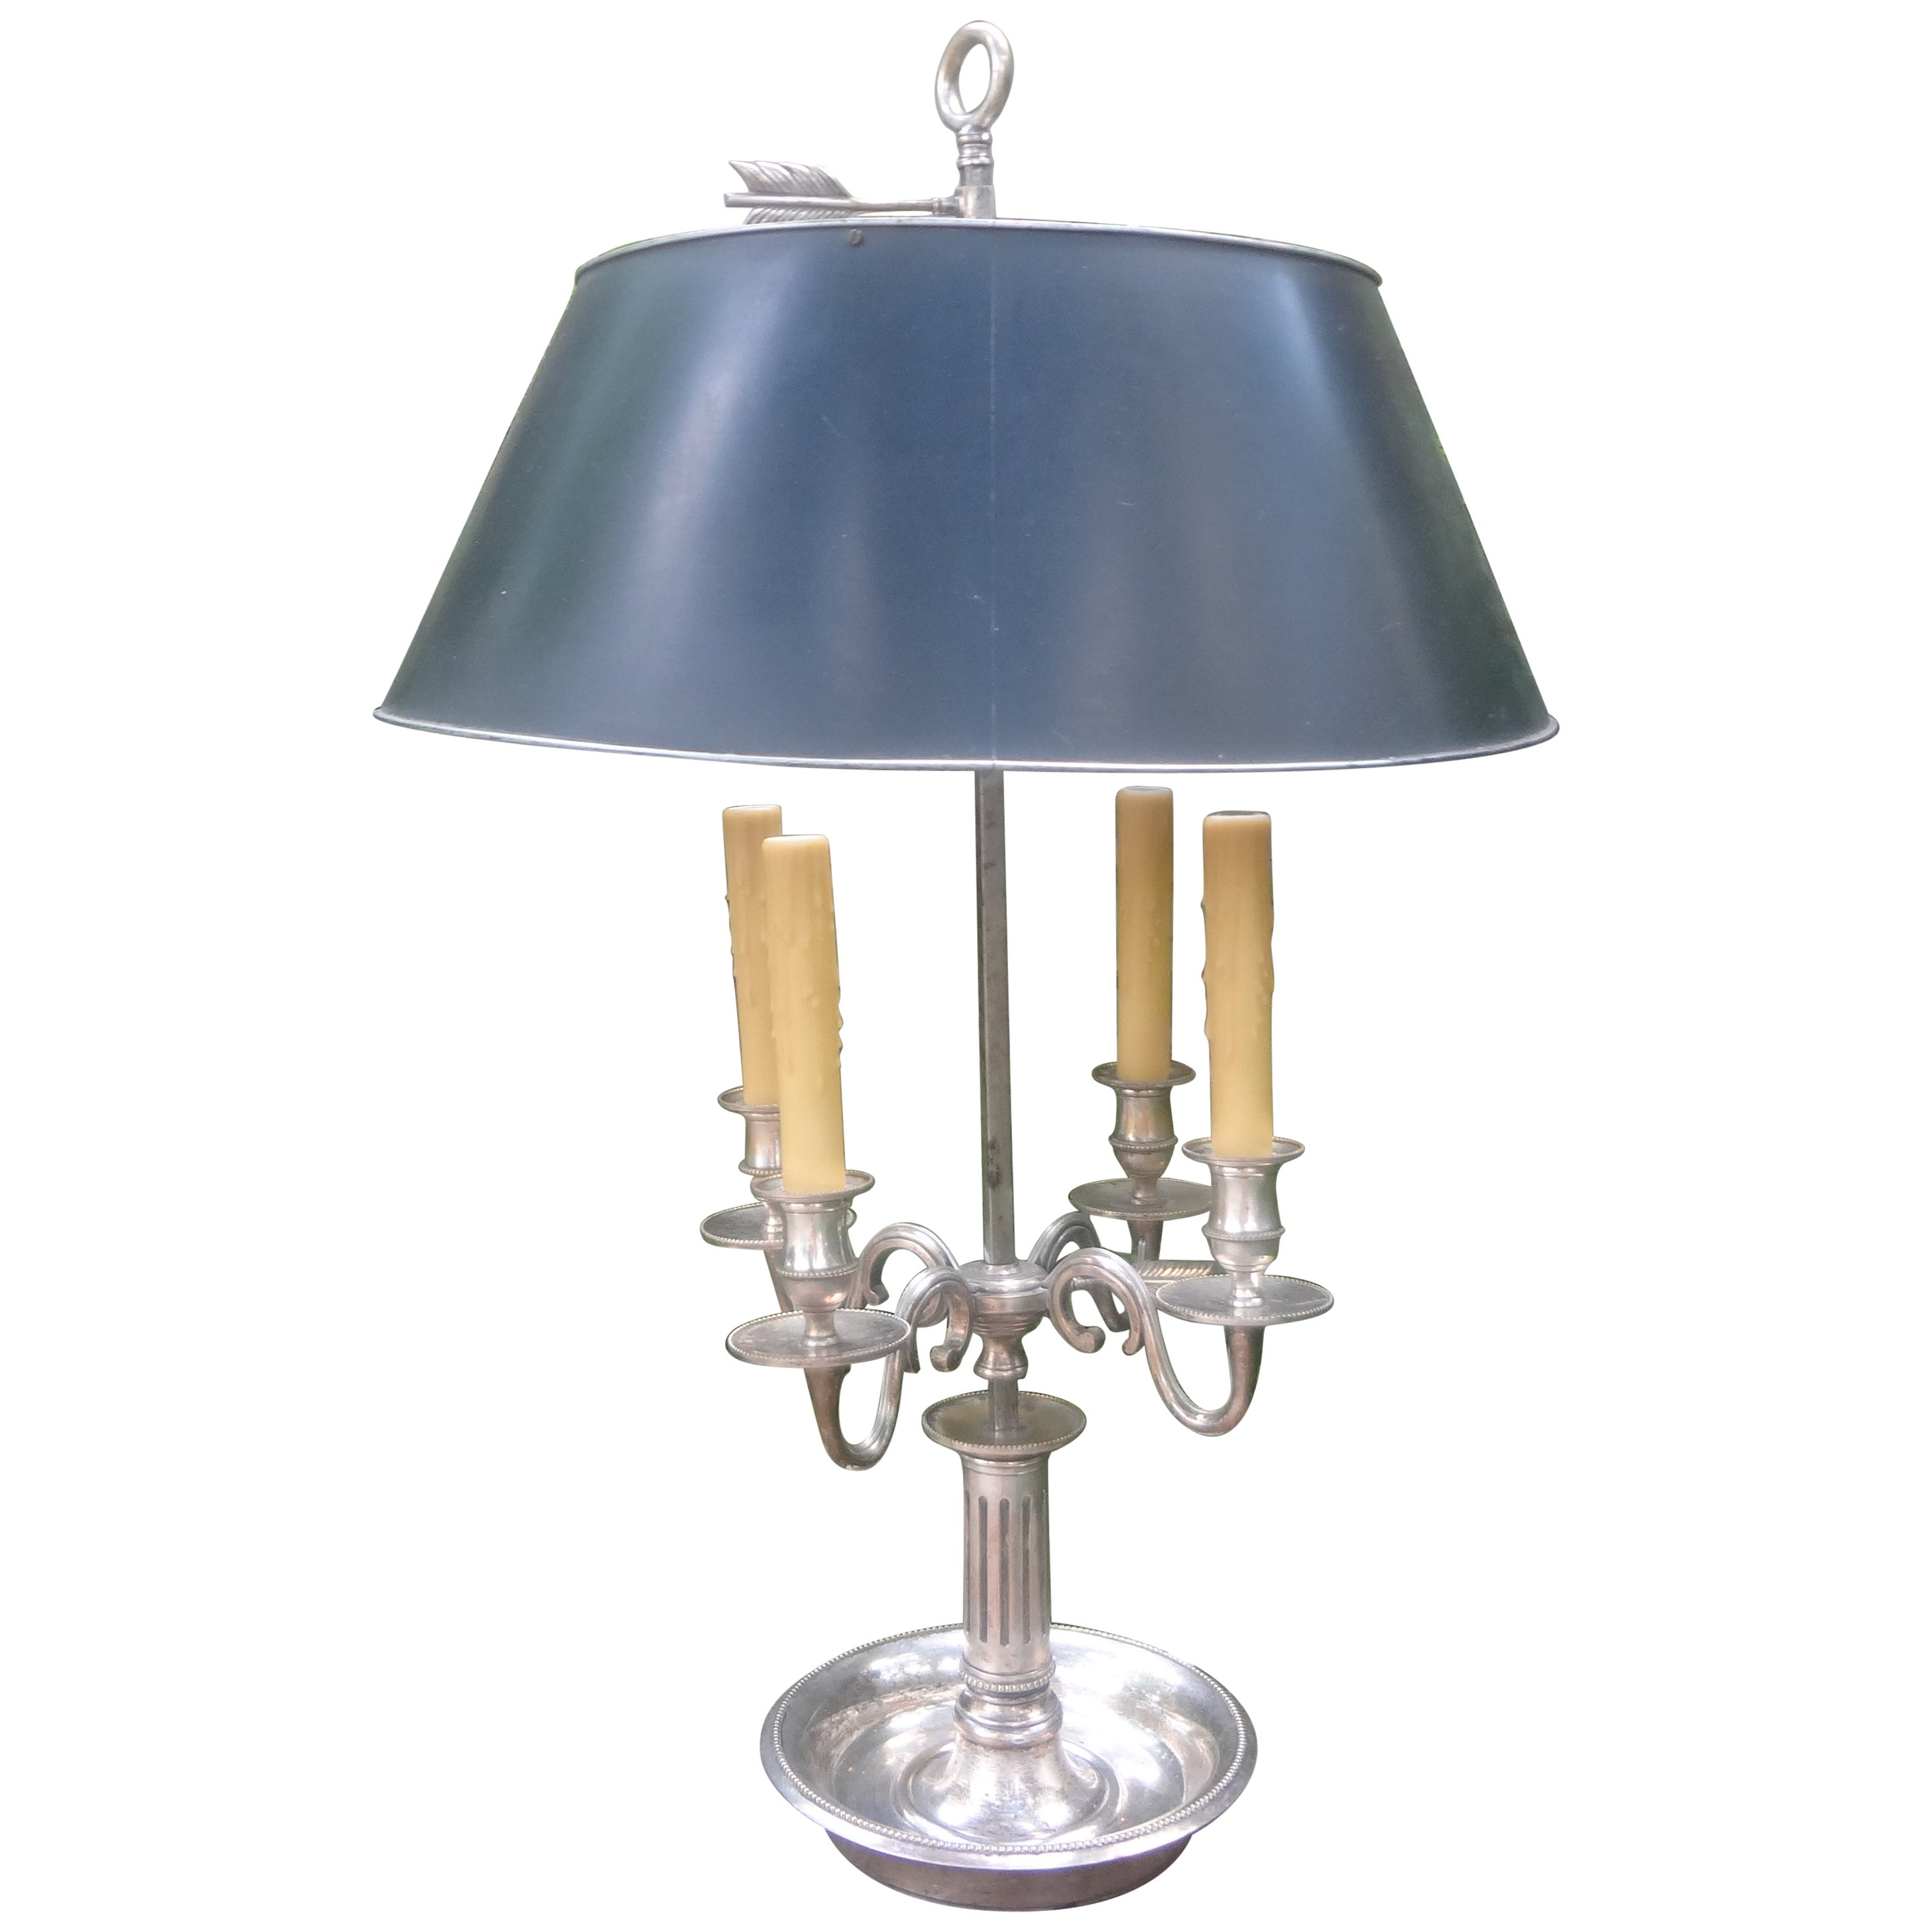 Monumental 19th Century French Louis XVI Style Bouillotte Lamp For Sale